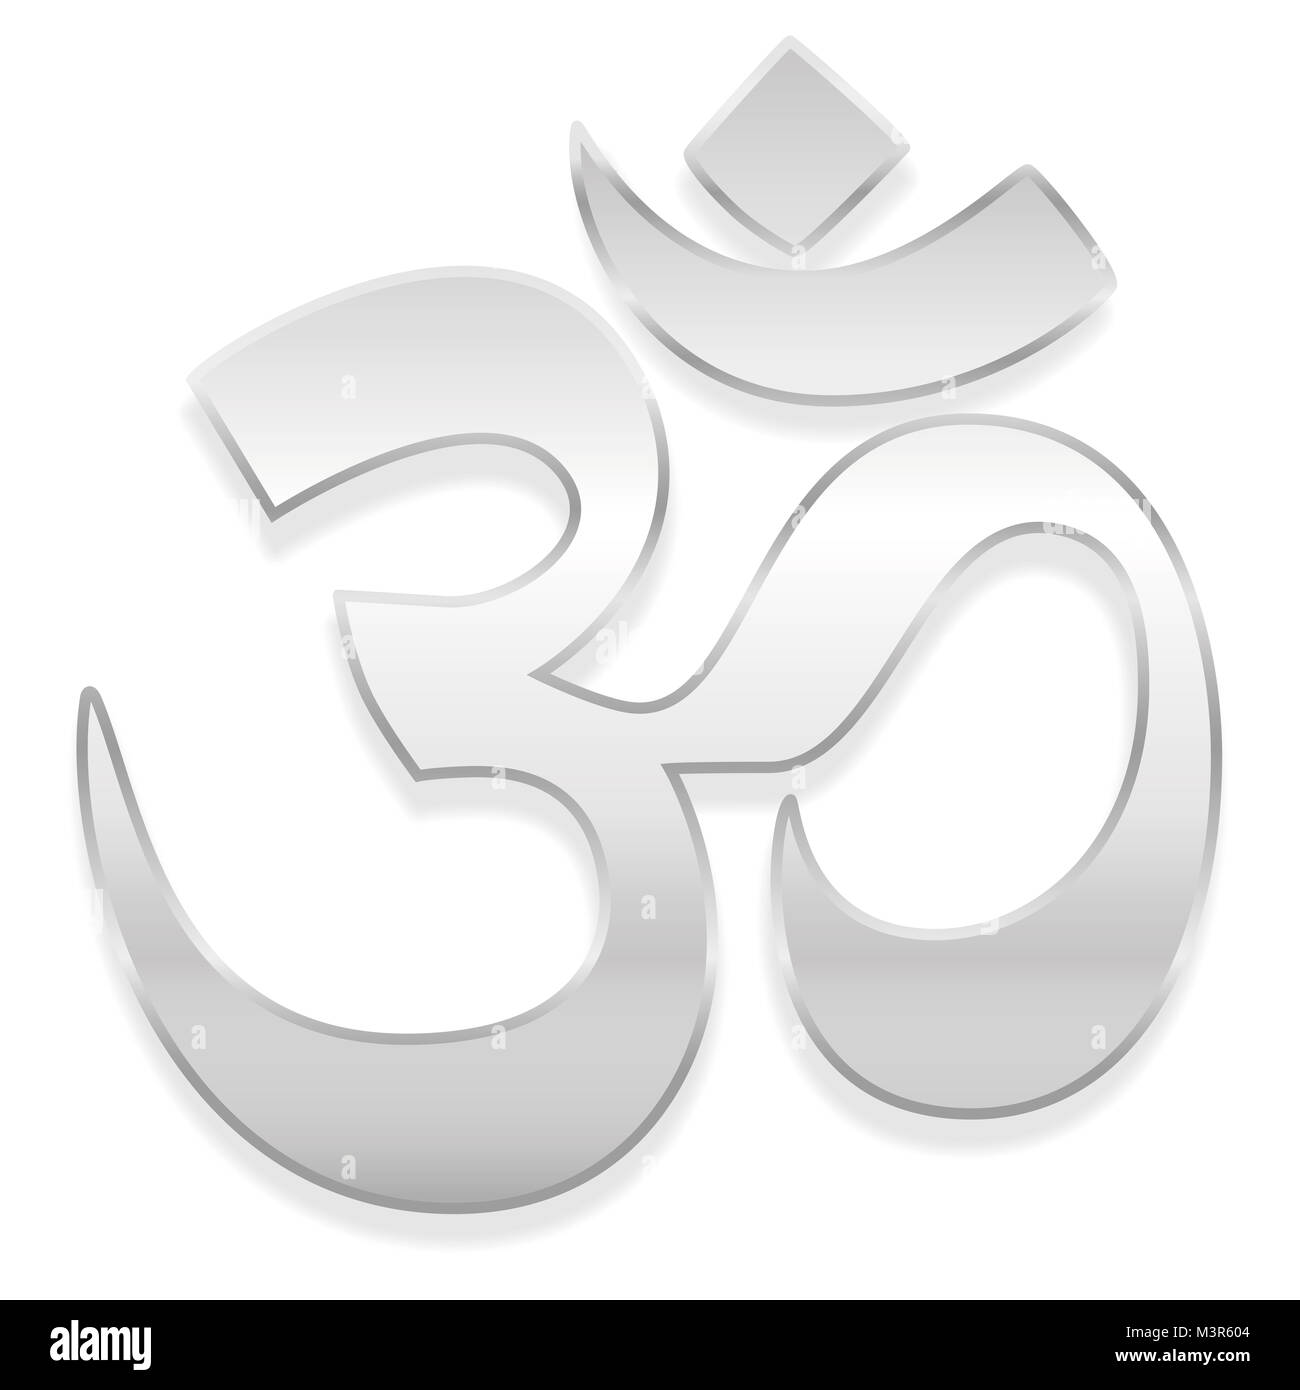 Om or Aum symbol. Spiritual healing silver symbol of buddhism and hinduism - illustration on white background. Stock Photo